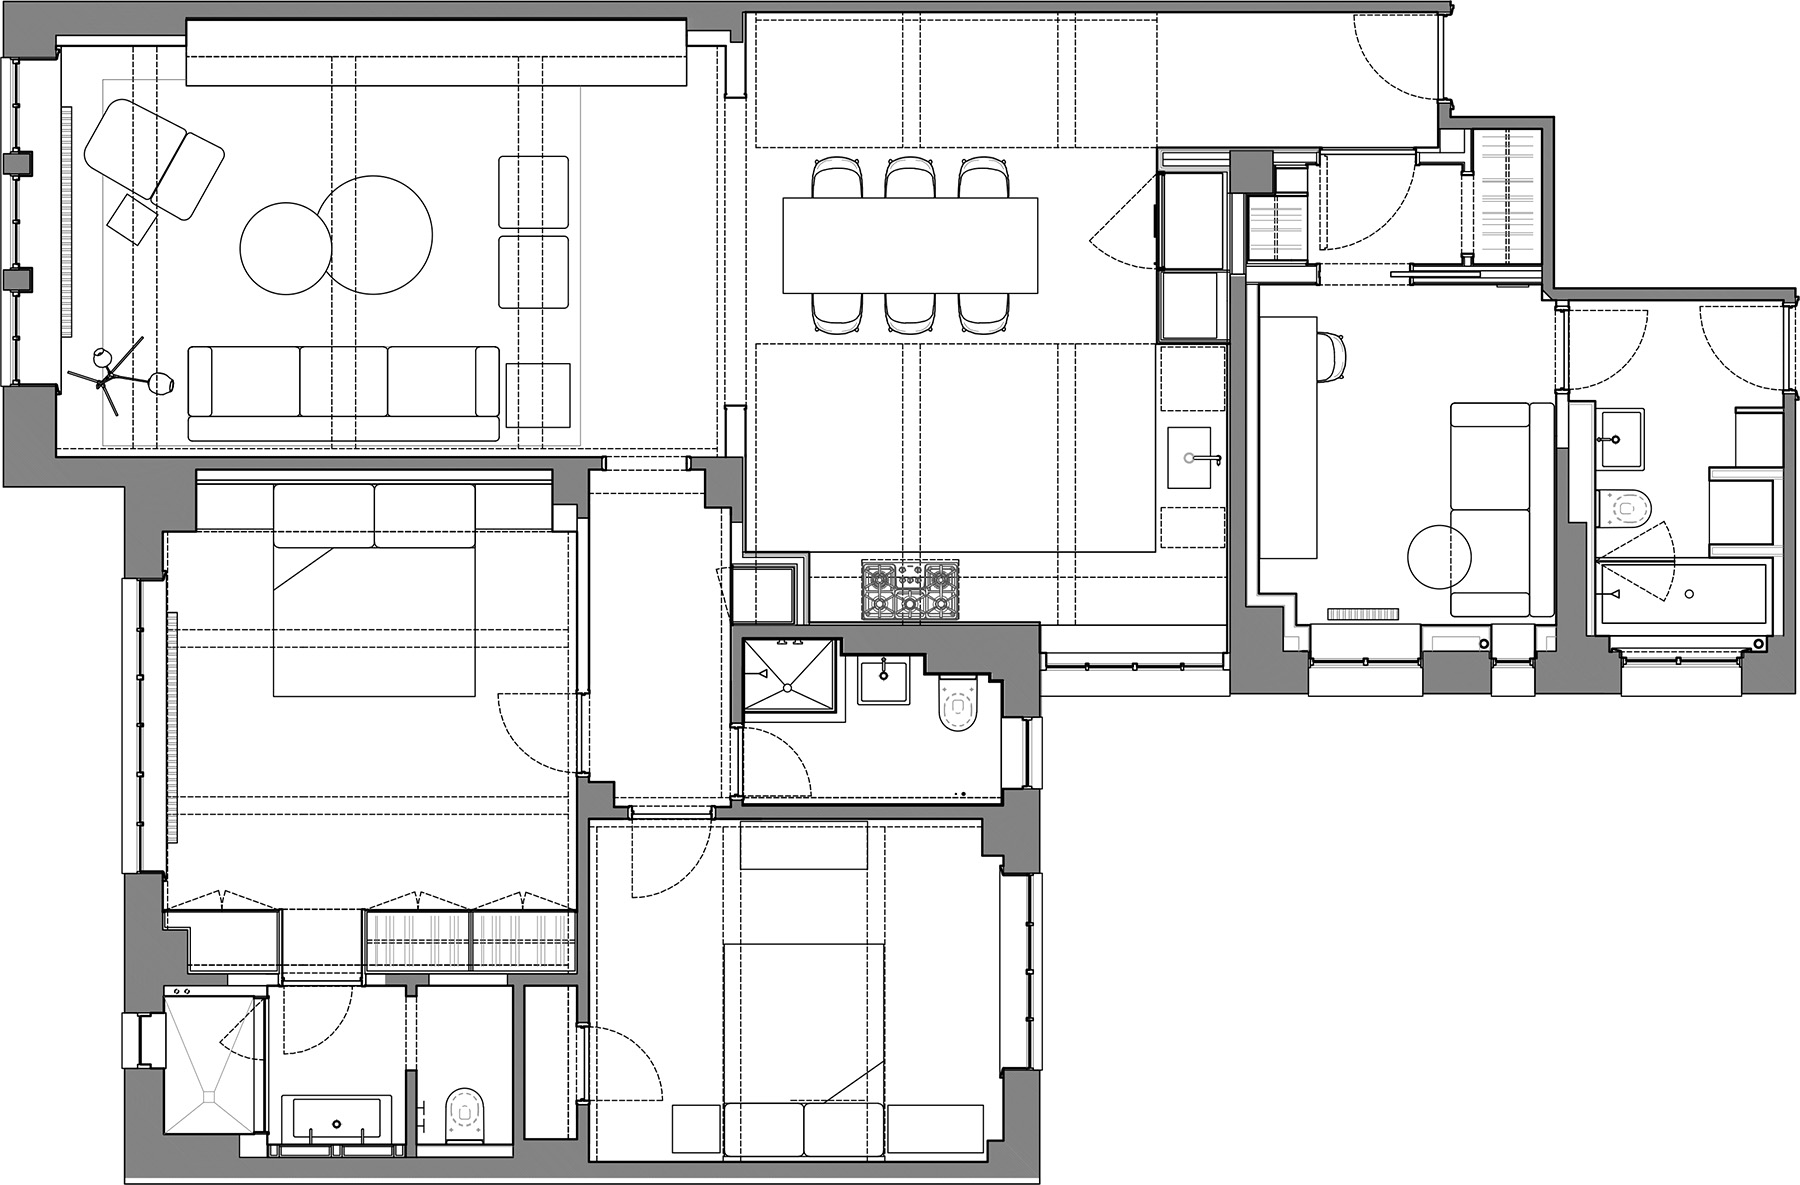 Stadt Architecture, Upper West Side Apartment II, Floor Plan, STADT, nyc architects, ny apartment renovation